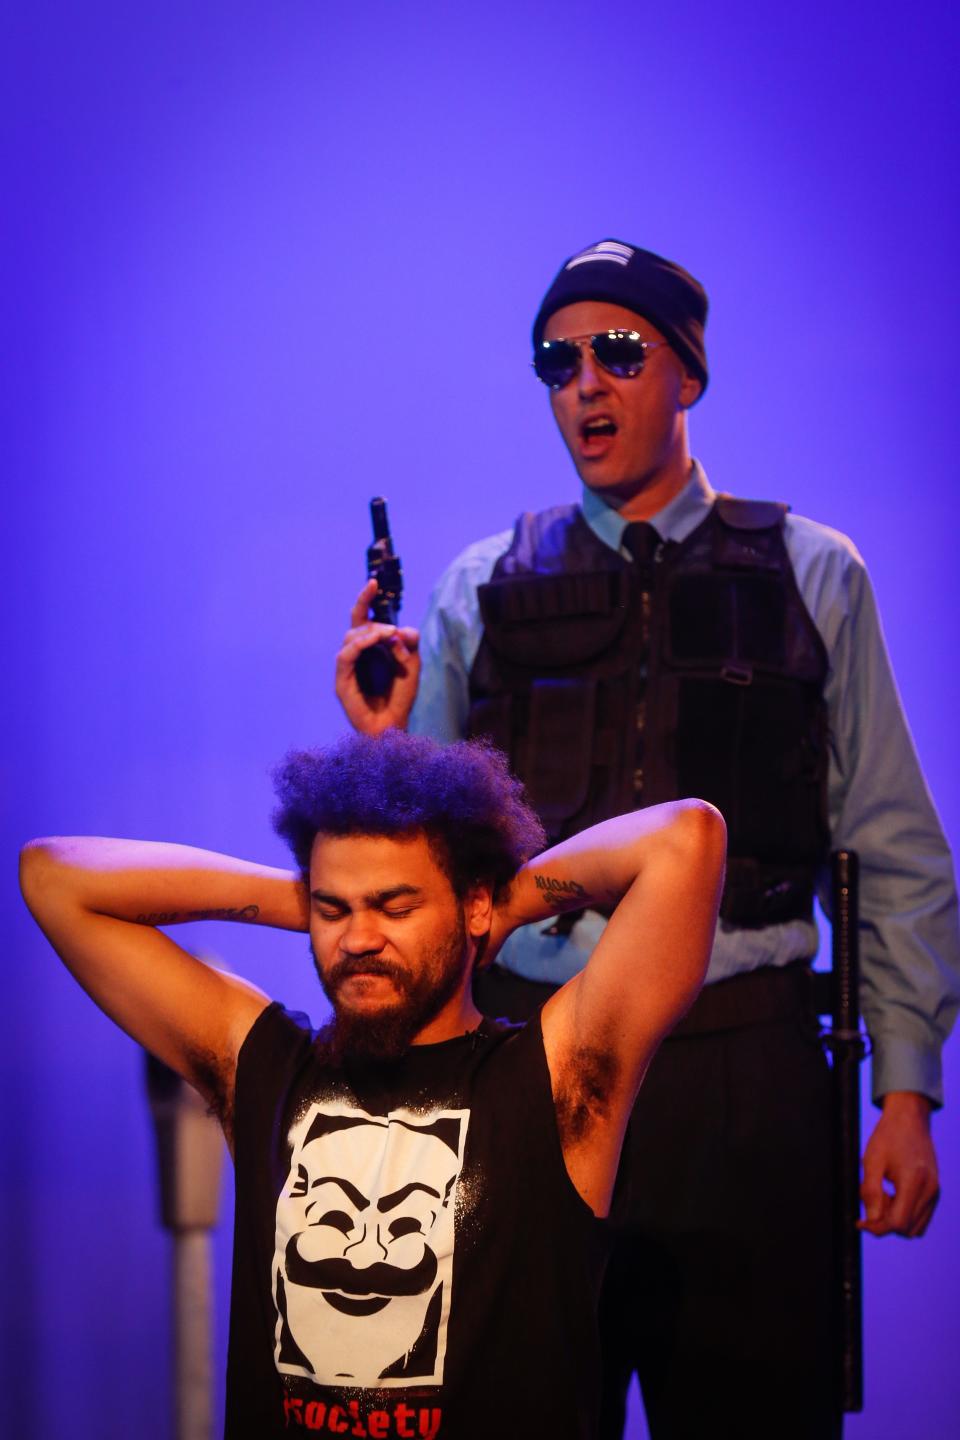 Jonathan Newman as Ossifer prepares to point a prop gun at Mikil Hernandez as Moses during Springfield Contemporary Theatre's dress rehearsal of "Pass Over" at the Historic Fox Theatre on Wednesday, July 19, 2023. "Pass Over" runs July 21-23, 27-30 and Aug. 3-6, 2023.